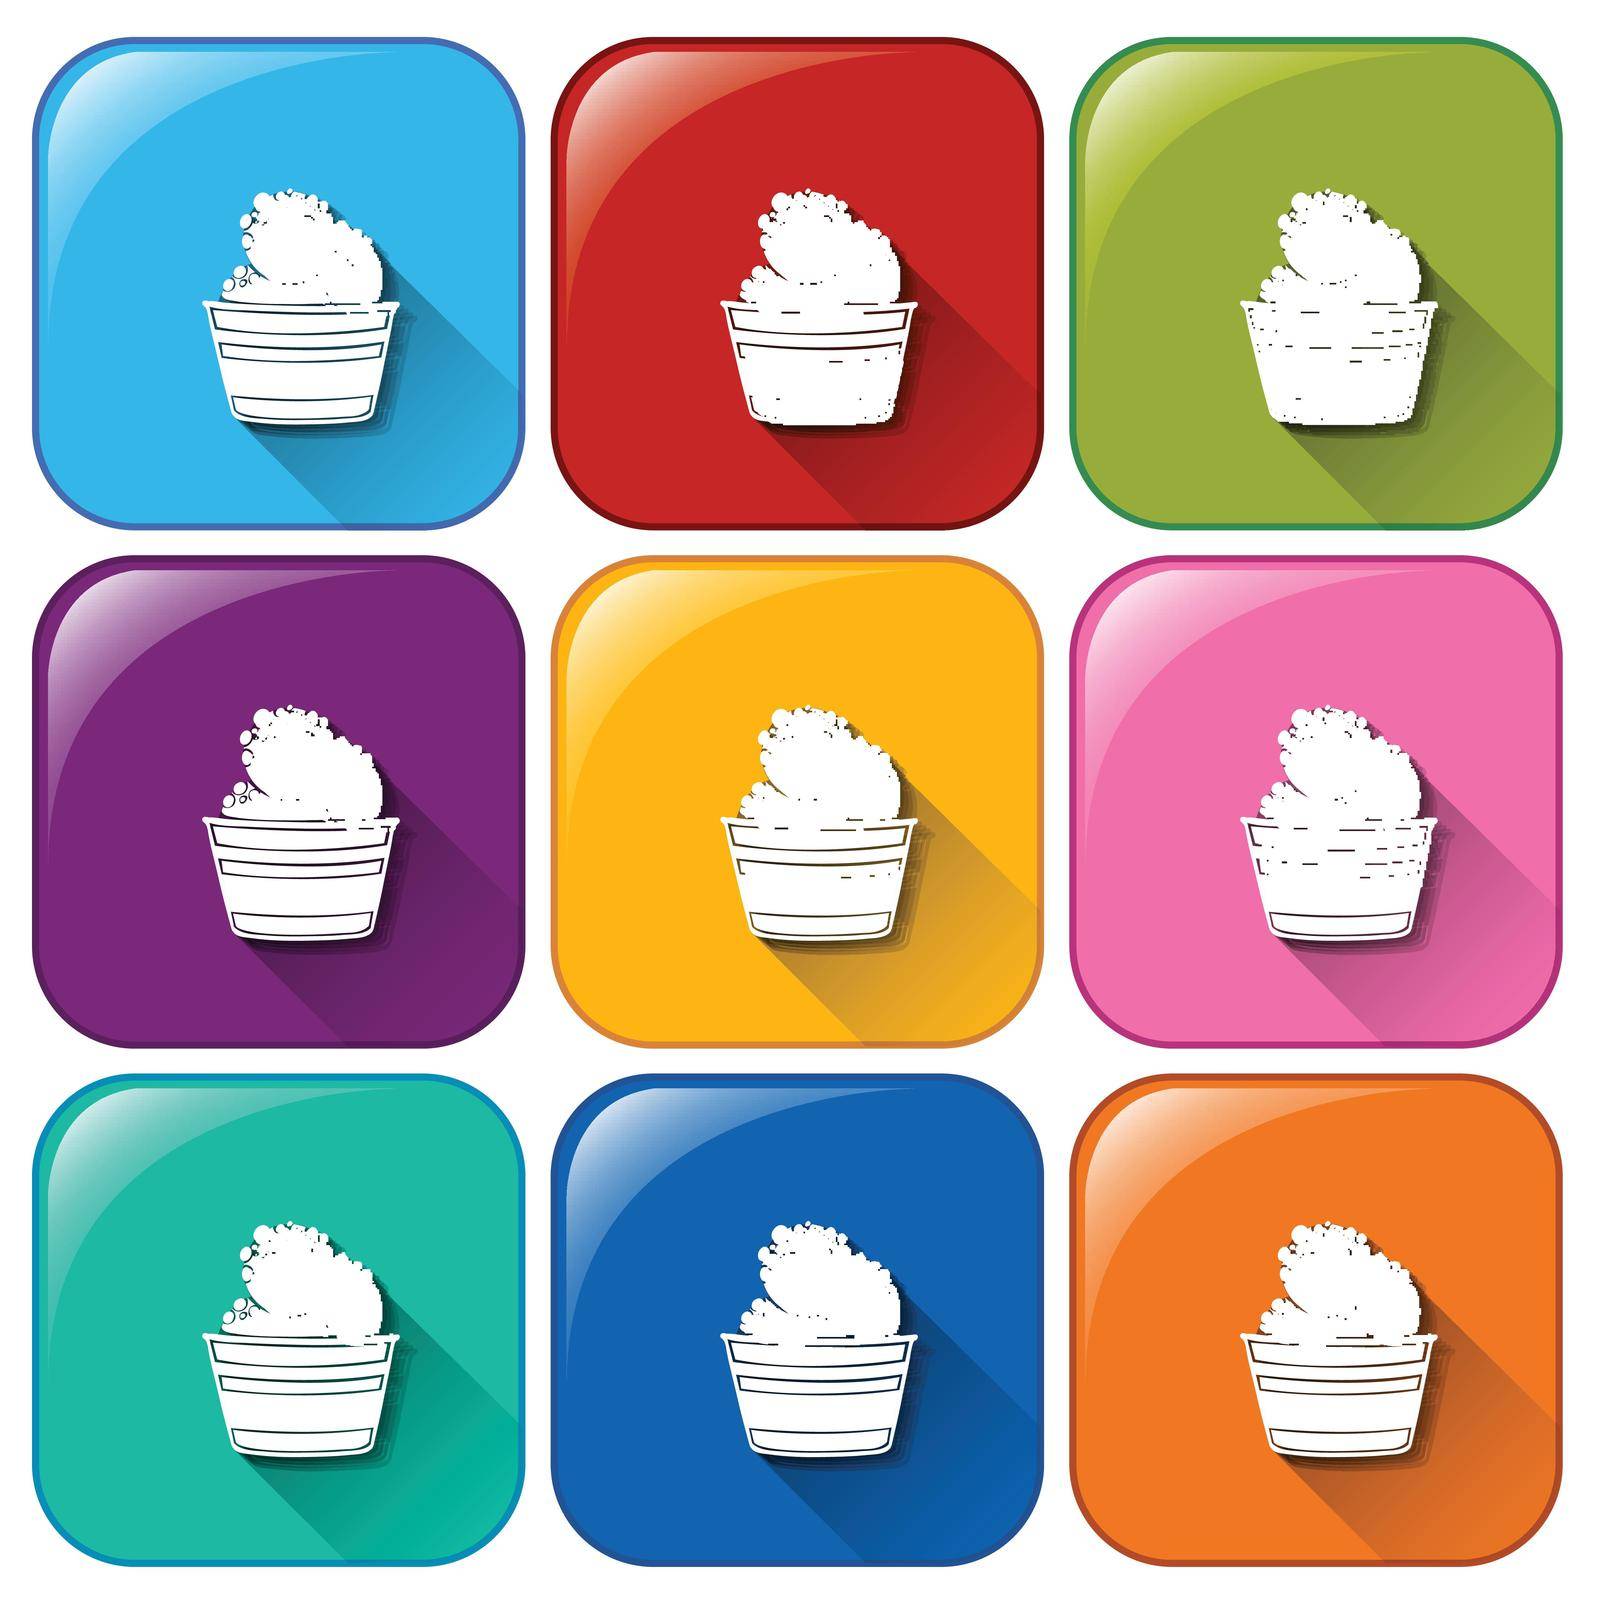 Dessert icons by iimages